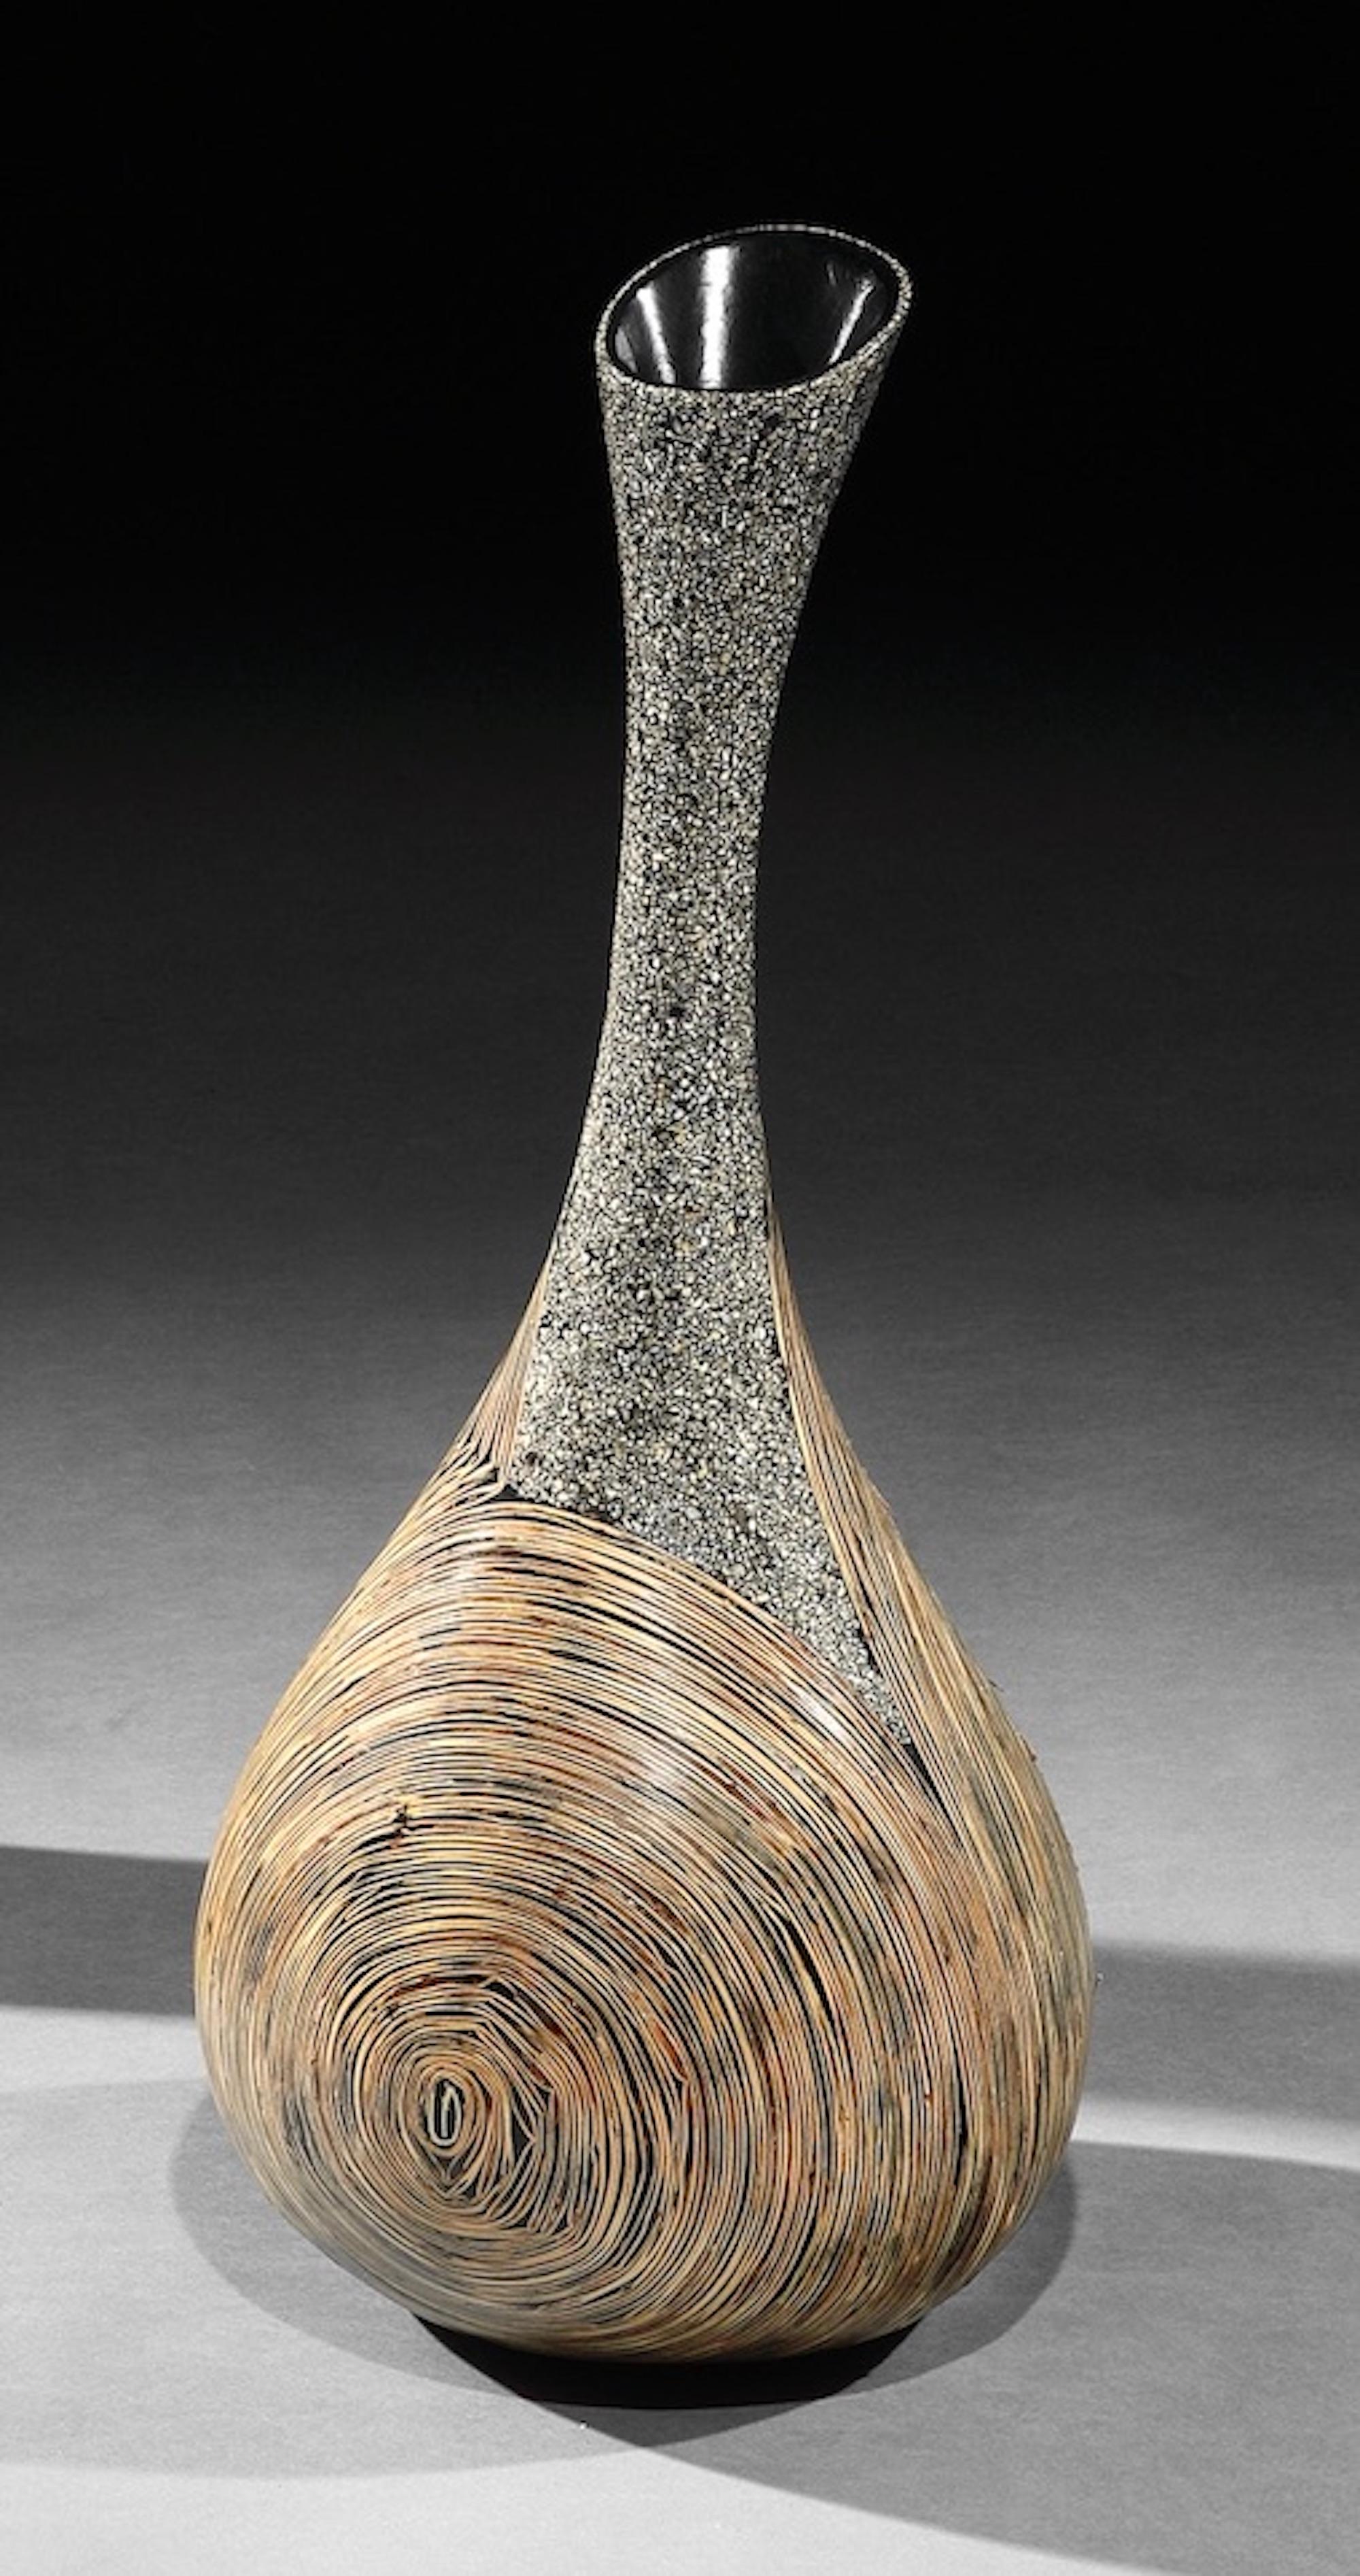 Lusia Robinson: Infinity Vase
This vase is characteristic of Robinson’s work emphasizing materiality within form integrating indigenous materials with modern technology and applications

- The open lip, sweeping neck and round body create a fluid